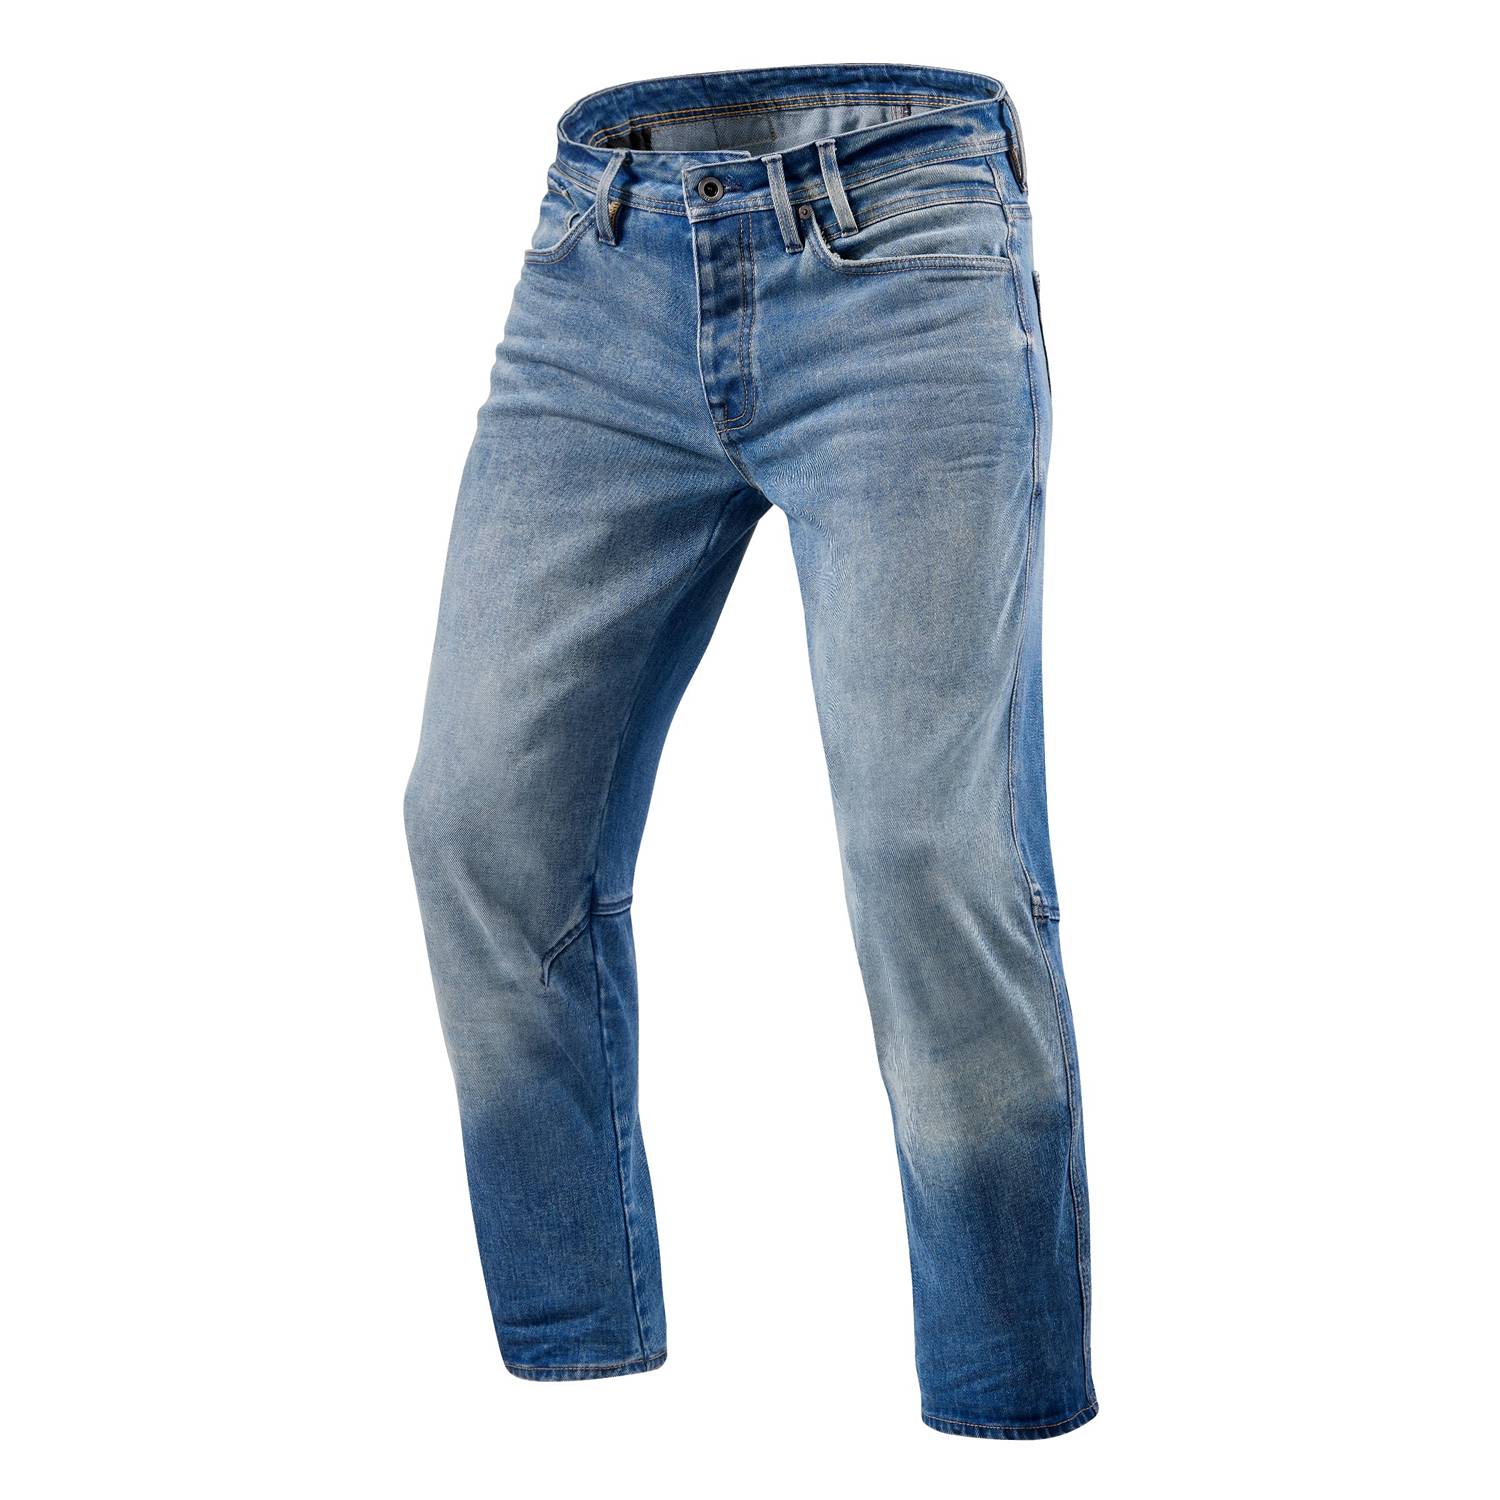 Image of EU REV'IT! Salt TF Mid Blue Used Motorcycle Jeans Taille L34/W32